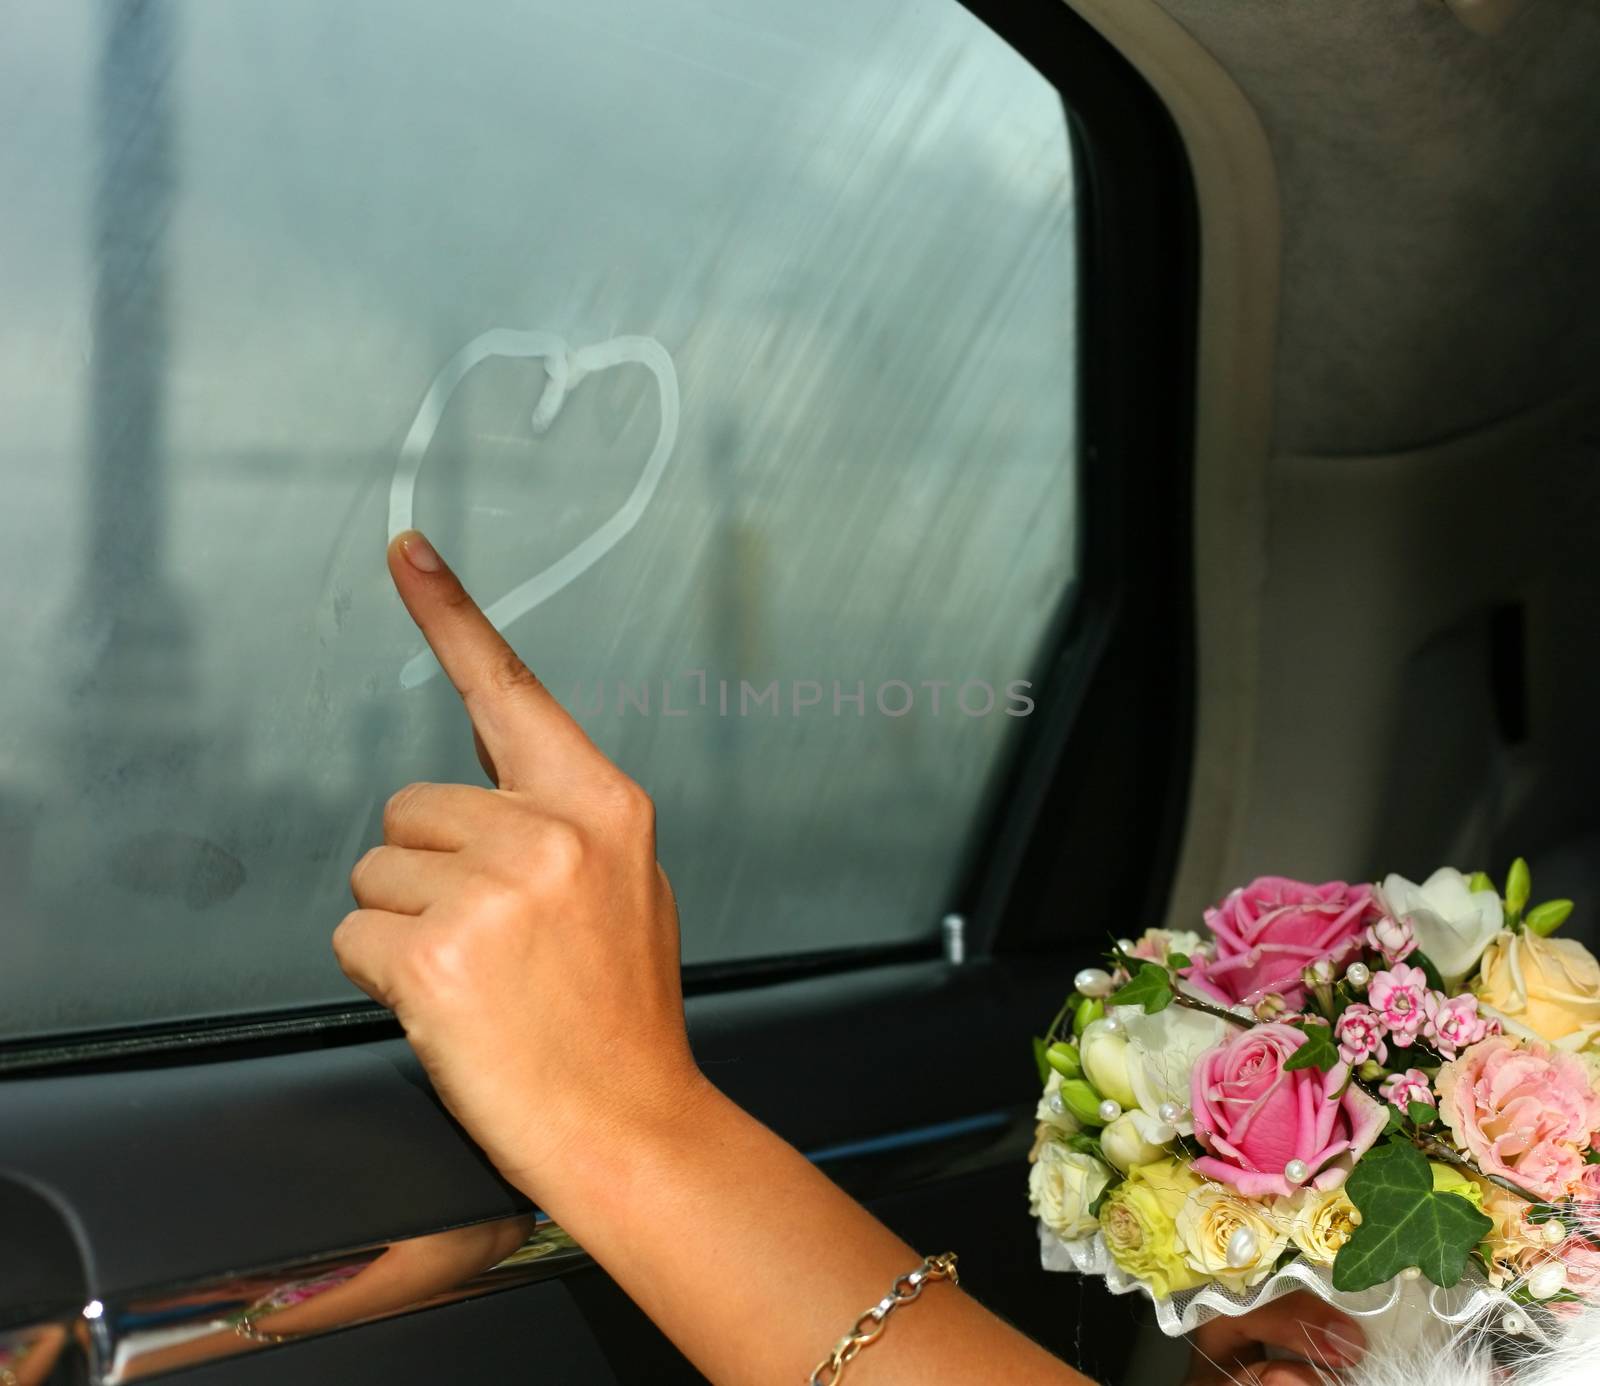 Bride draws heart at a window of the automobile by friday